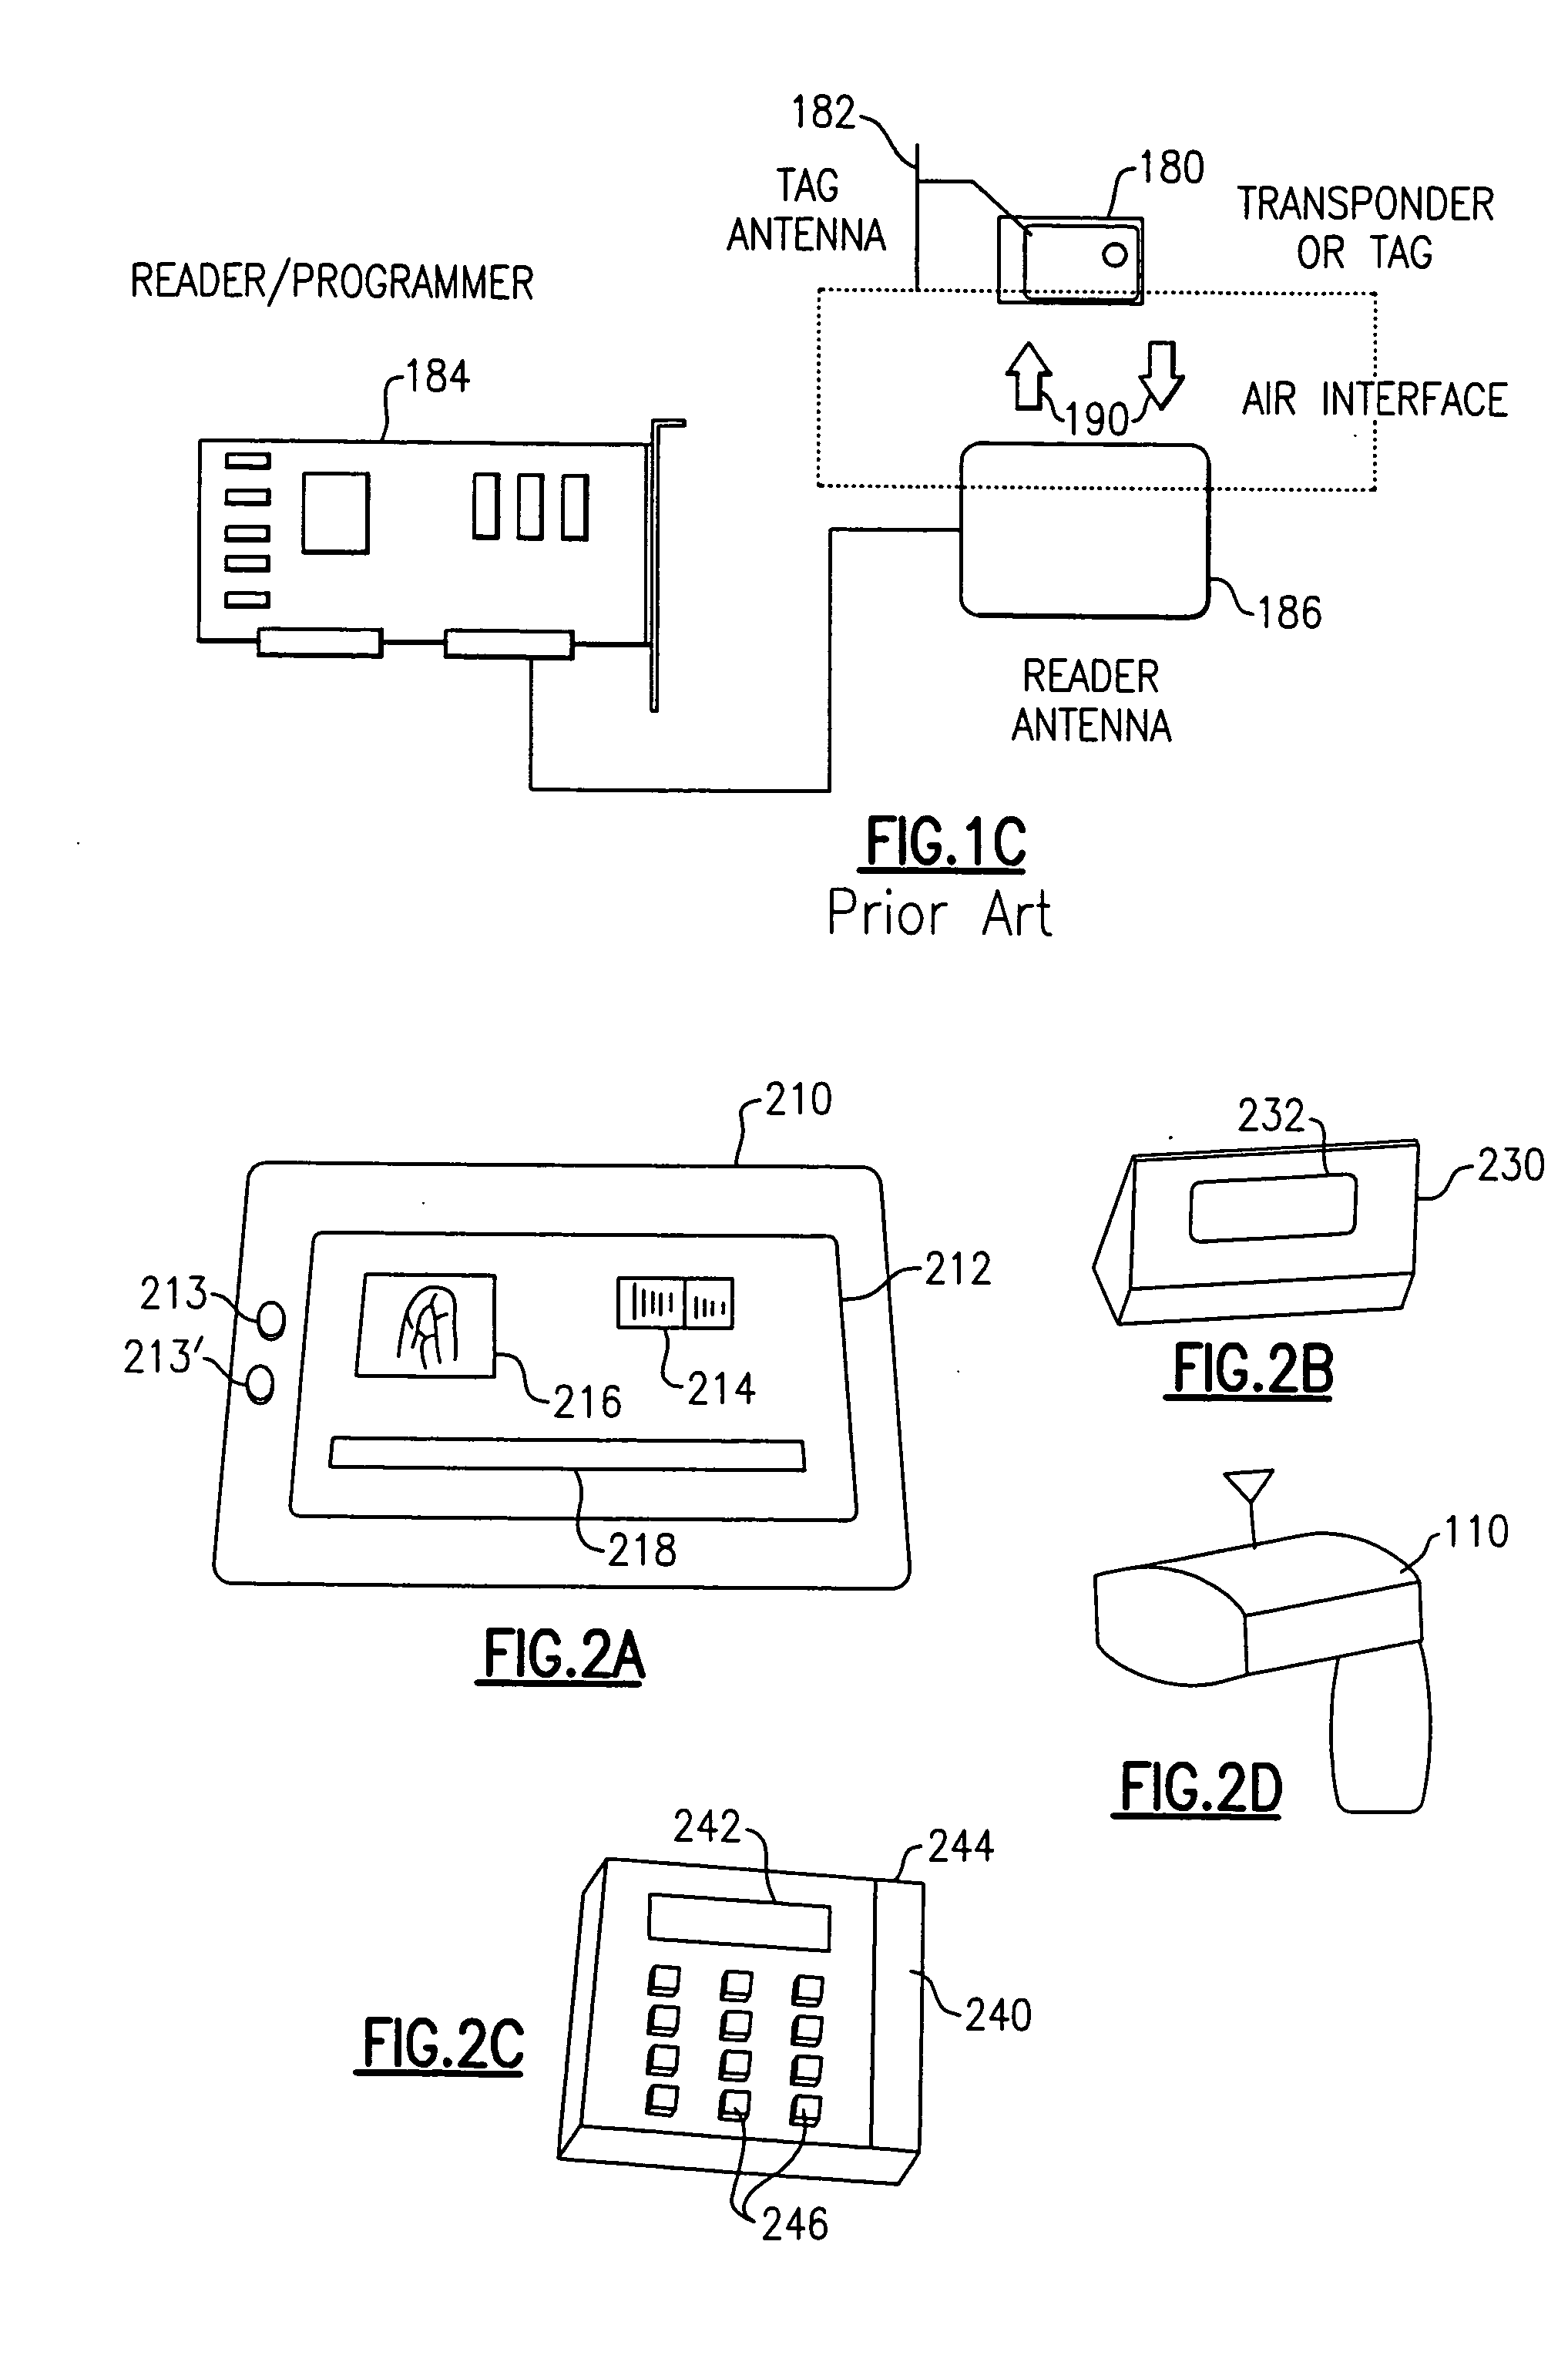 Proximity transaction apparatus and methods of use thereof